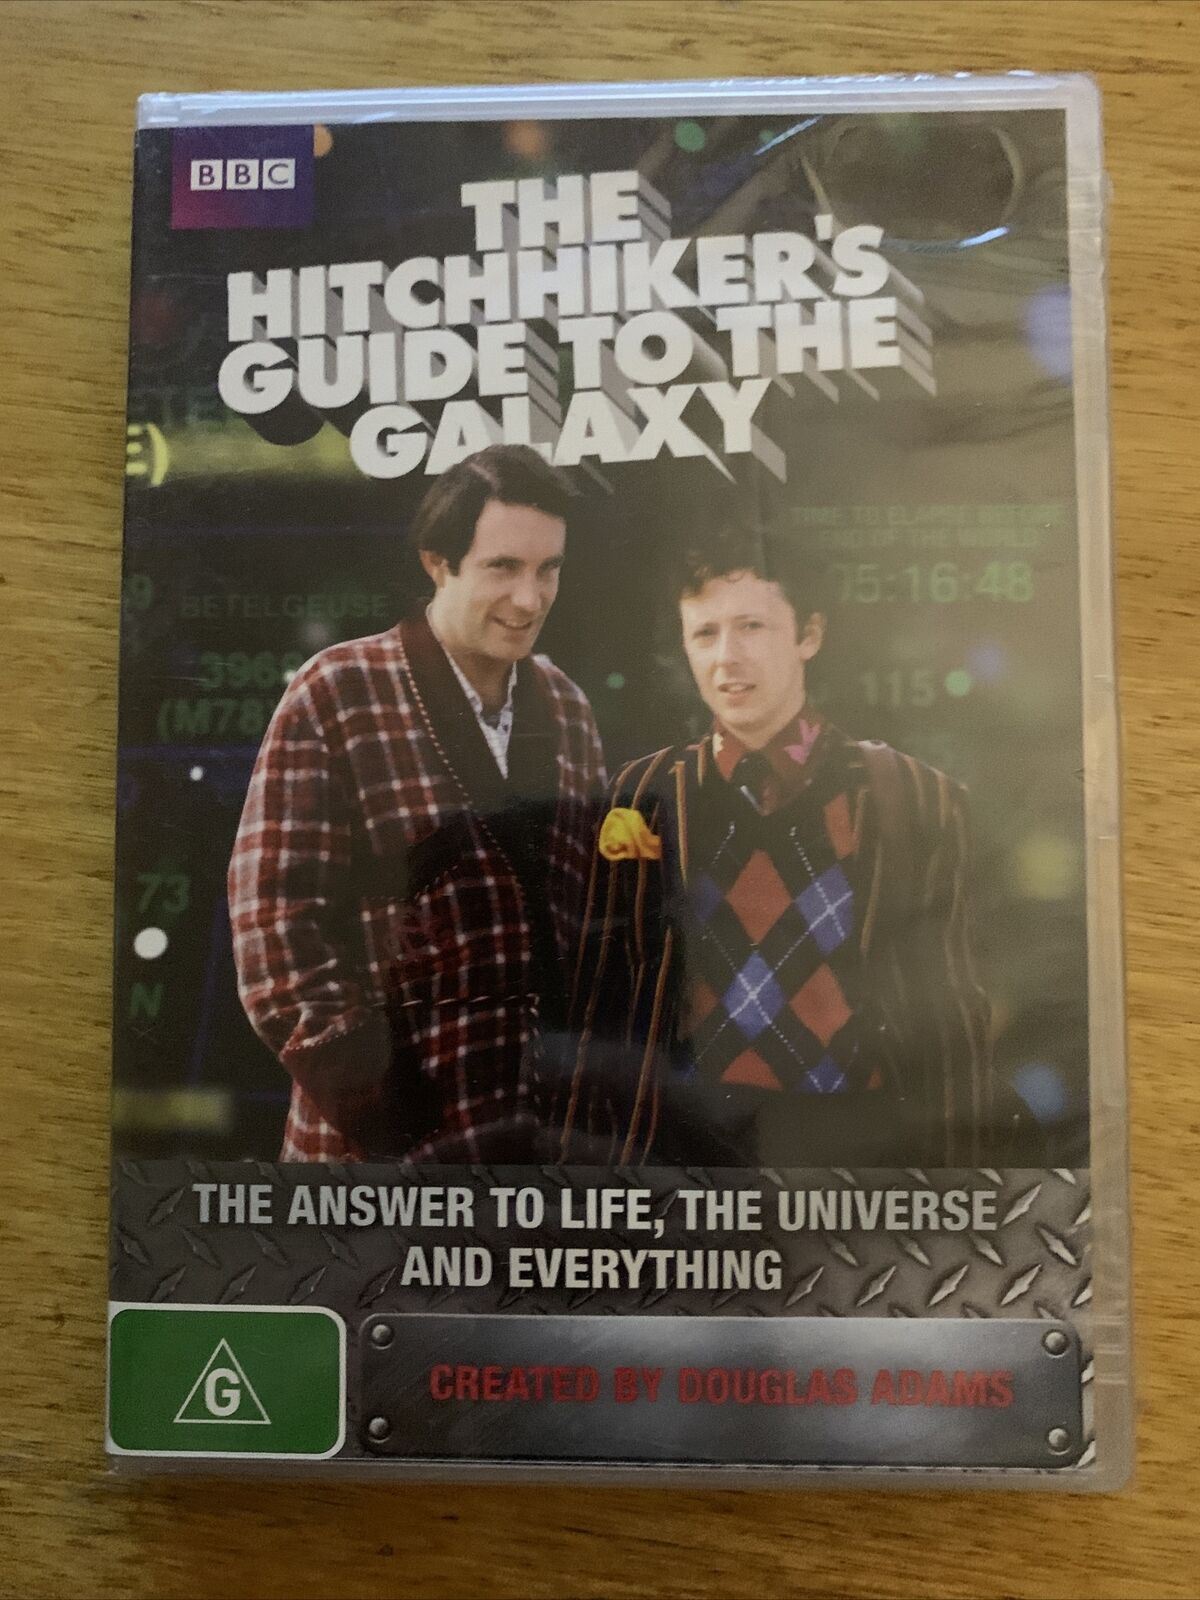 *New Sealed* The Hitchhikers Guide To The Galaxy (DVD, 1981) BBC Series. Region4